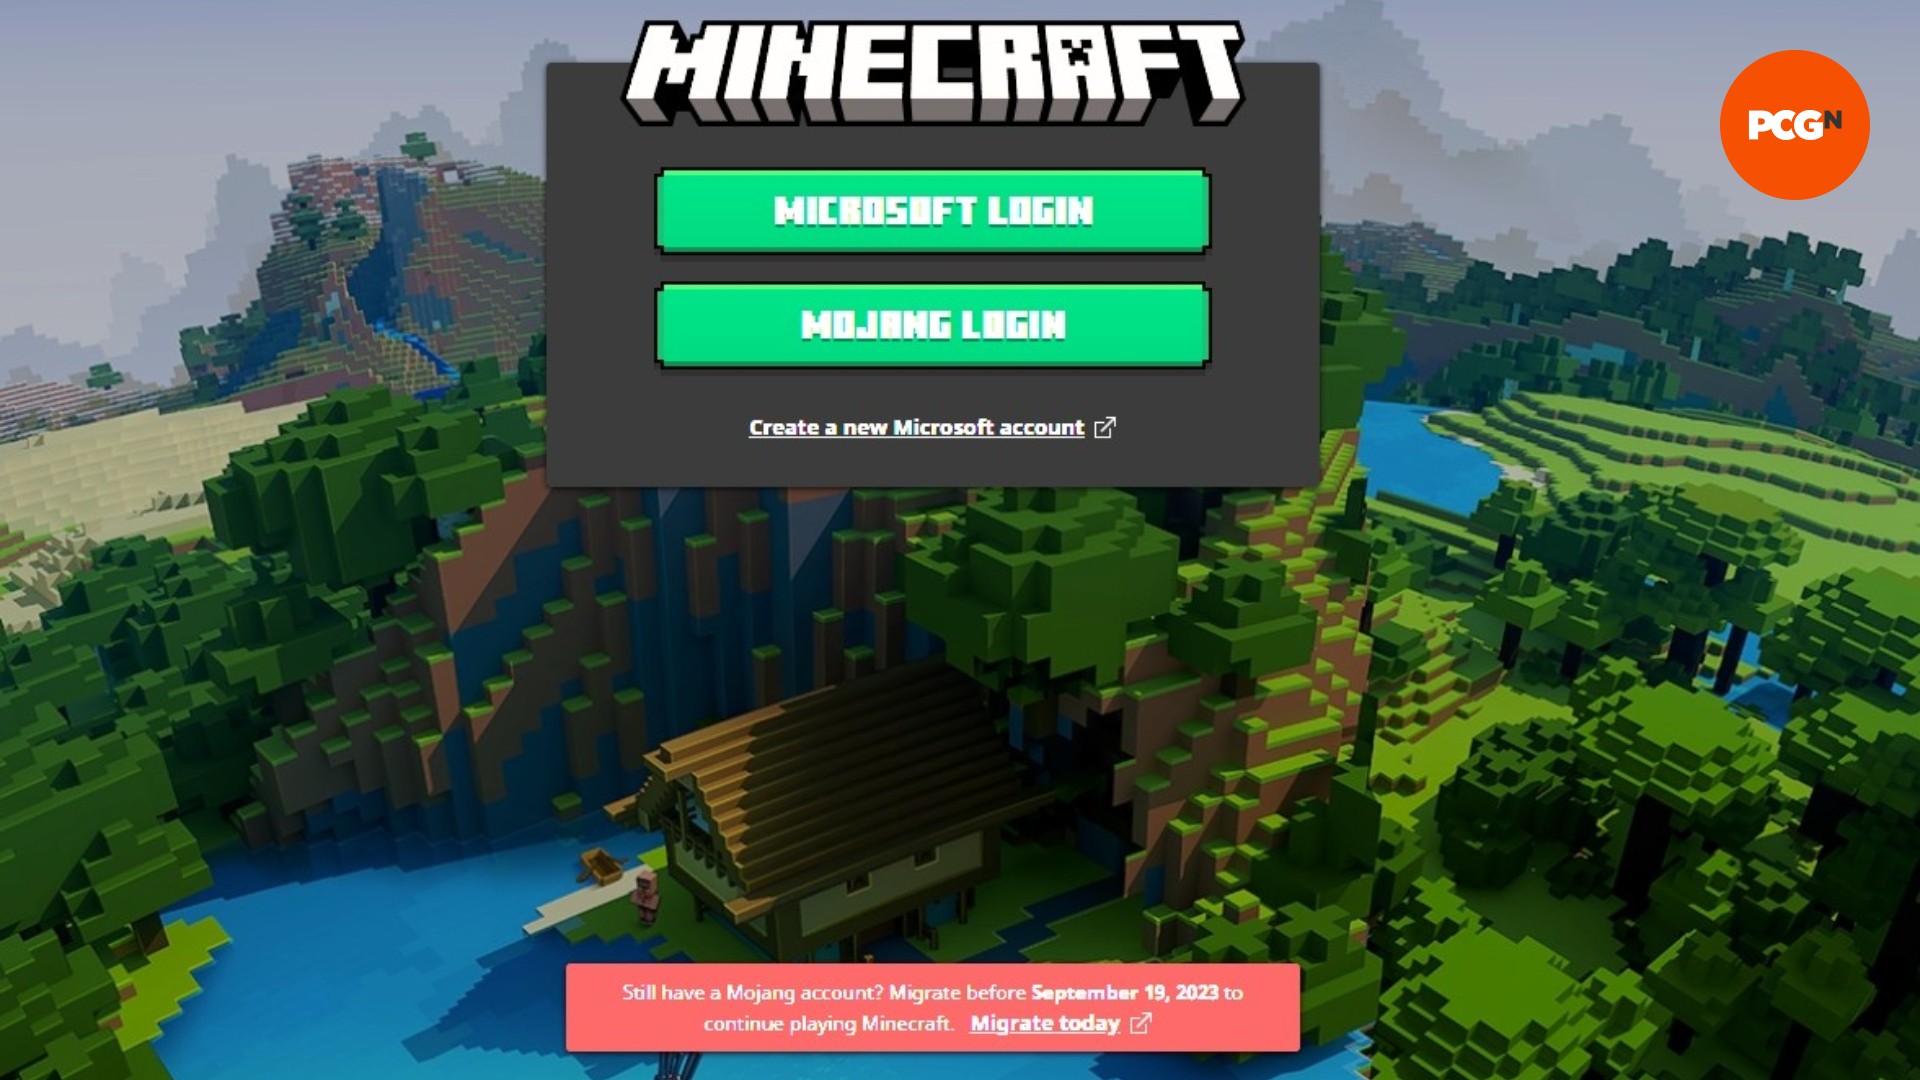 Minecraft account migration: An image of the Minecraft login screen